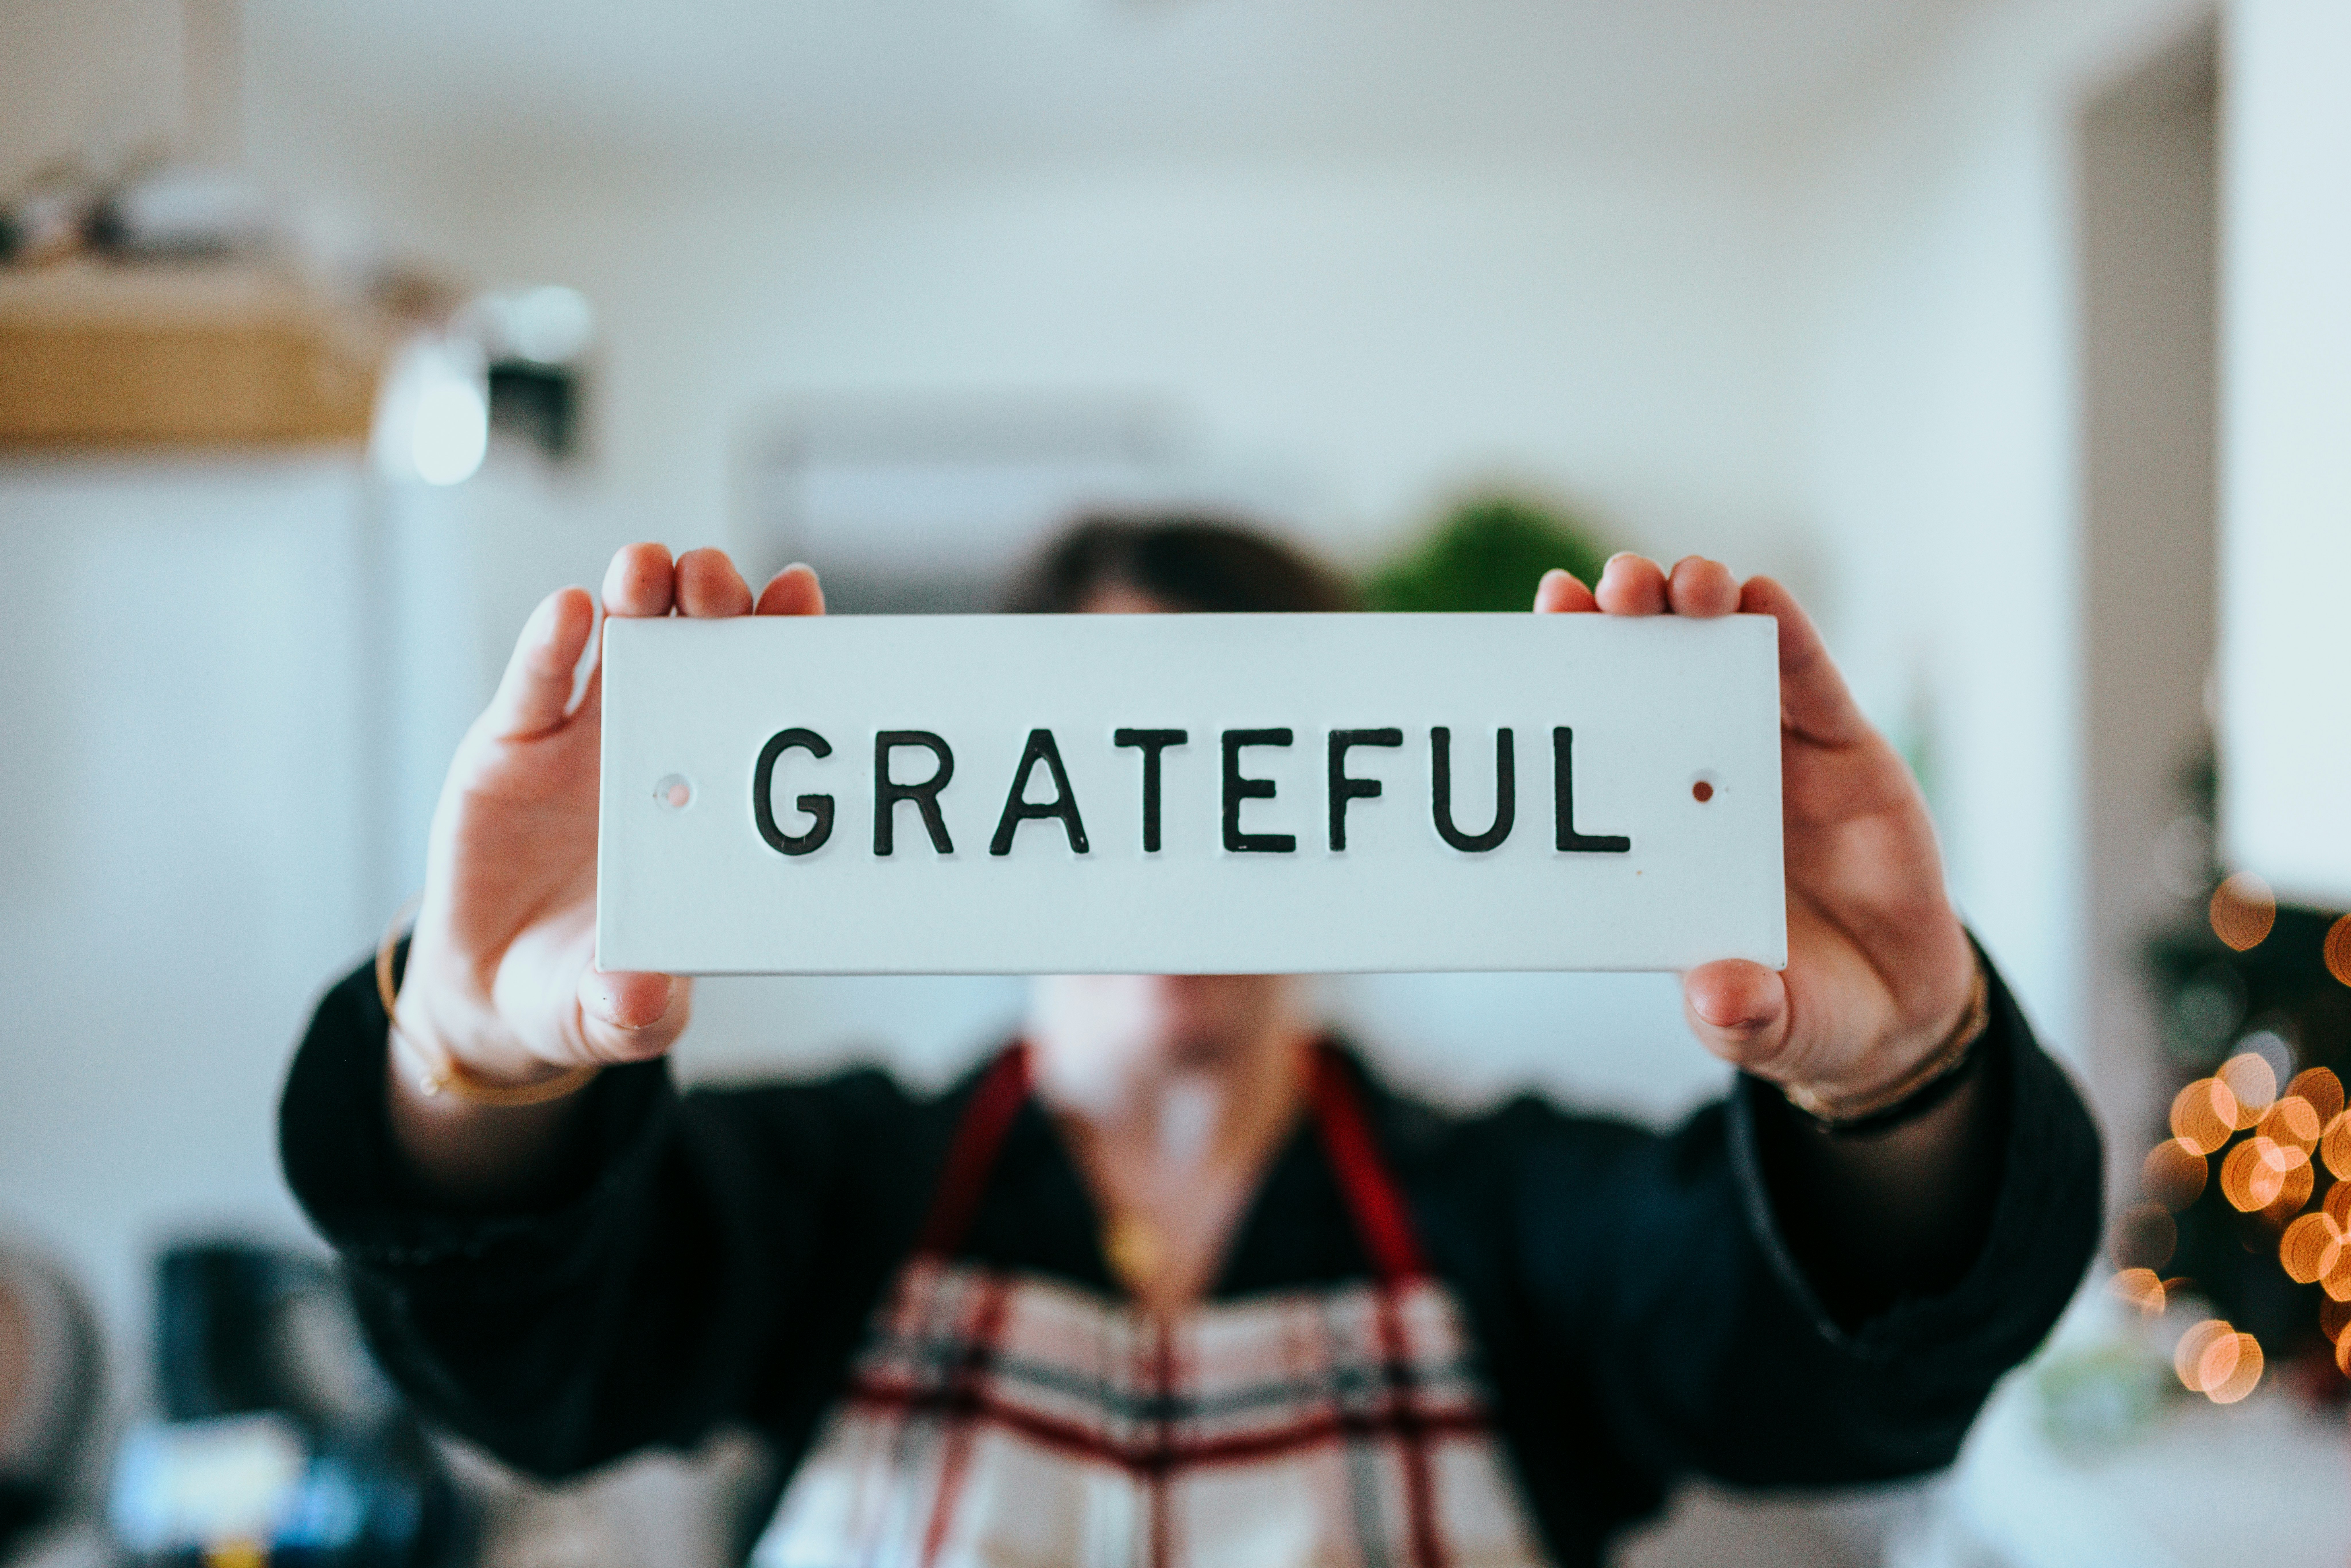 How to Practice Daily Gratitude